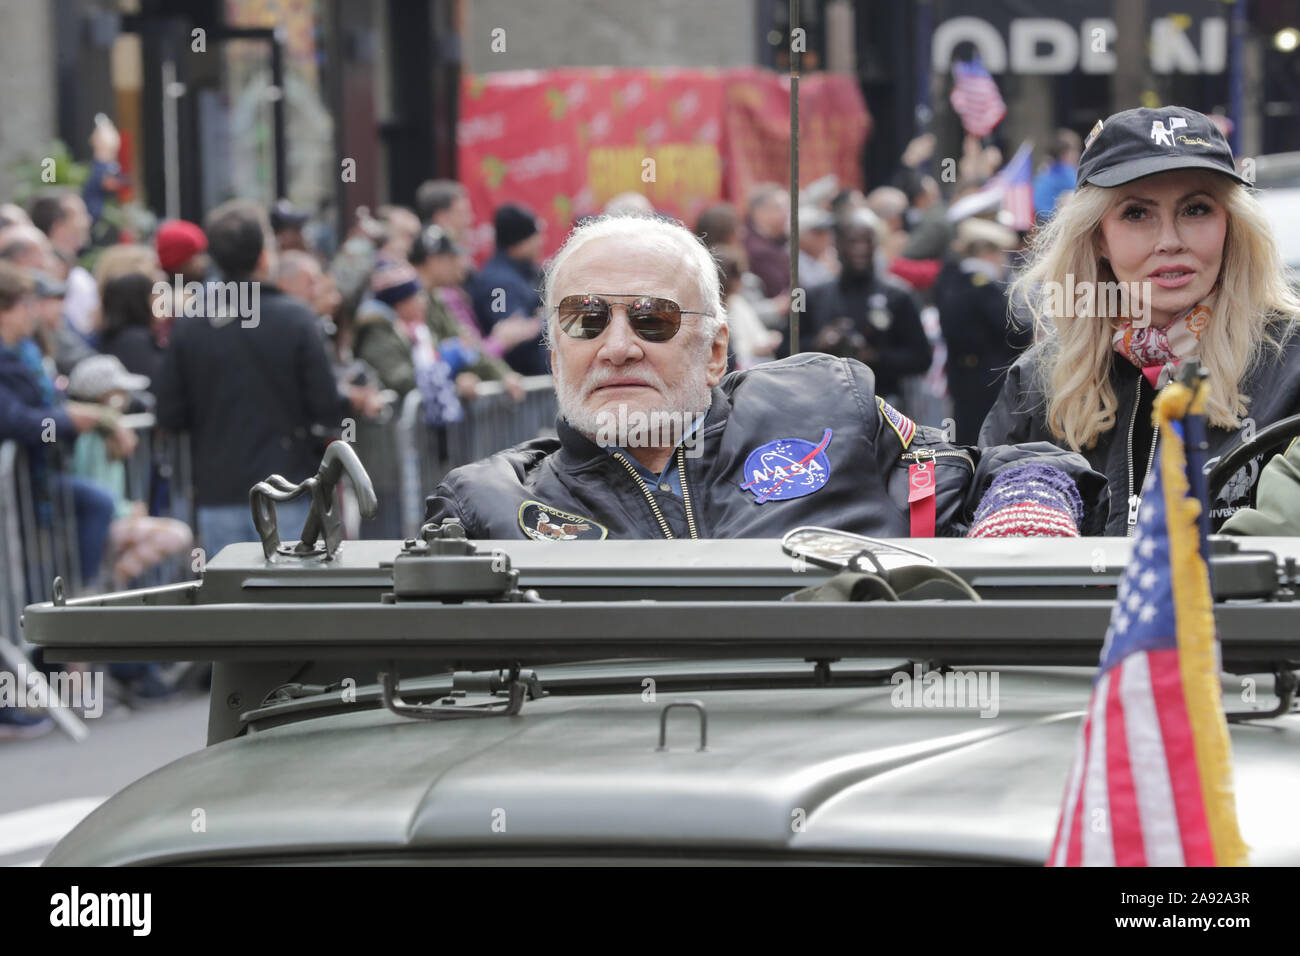 New York, NY, USA. 11th Nov, 2019. Fifth Avenue, New York, USA, November 11, 2019 - Buzz Aldrin Astronaut of Apollo 11 along with thousands of Veterans, Police, Firefighter and Spectators Celebrated Veterans Day 2019 today on Fifth Avenue in New York City.Photo: Luiz Rampelotto/EuropaNewswire.PHOTO CREDIT MANDATORY. Credit: Luiz Rampelotto/ZUMA Wire/Alamy Live News Stock Photo